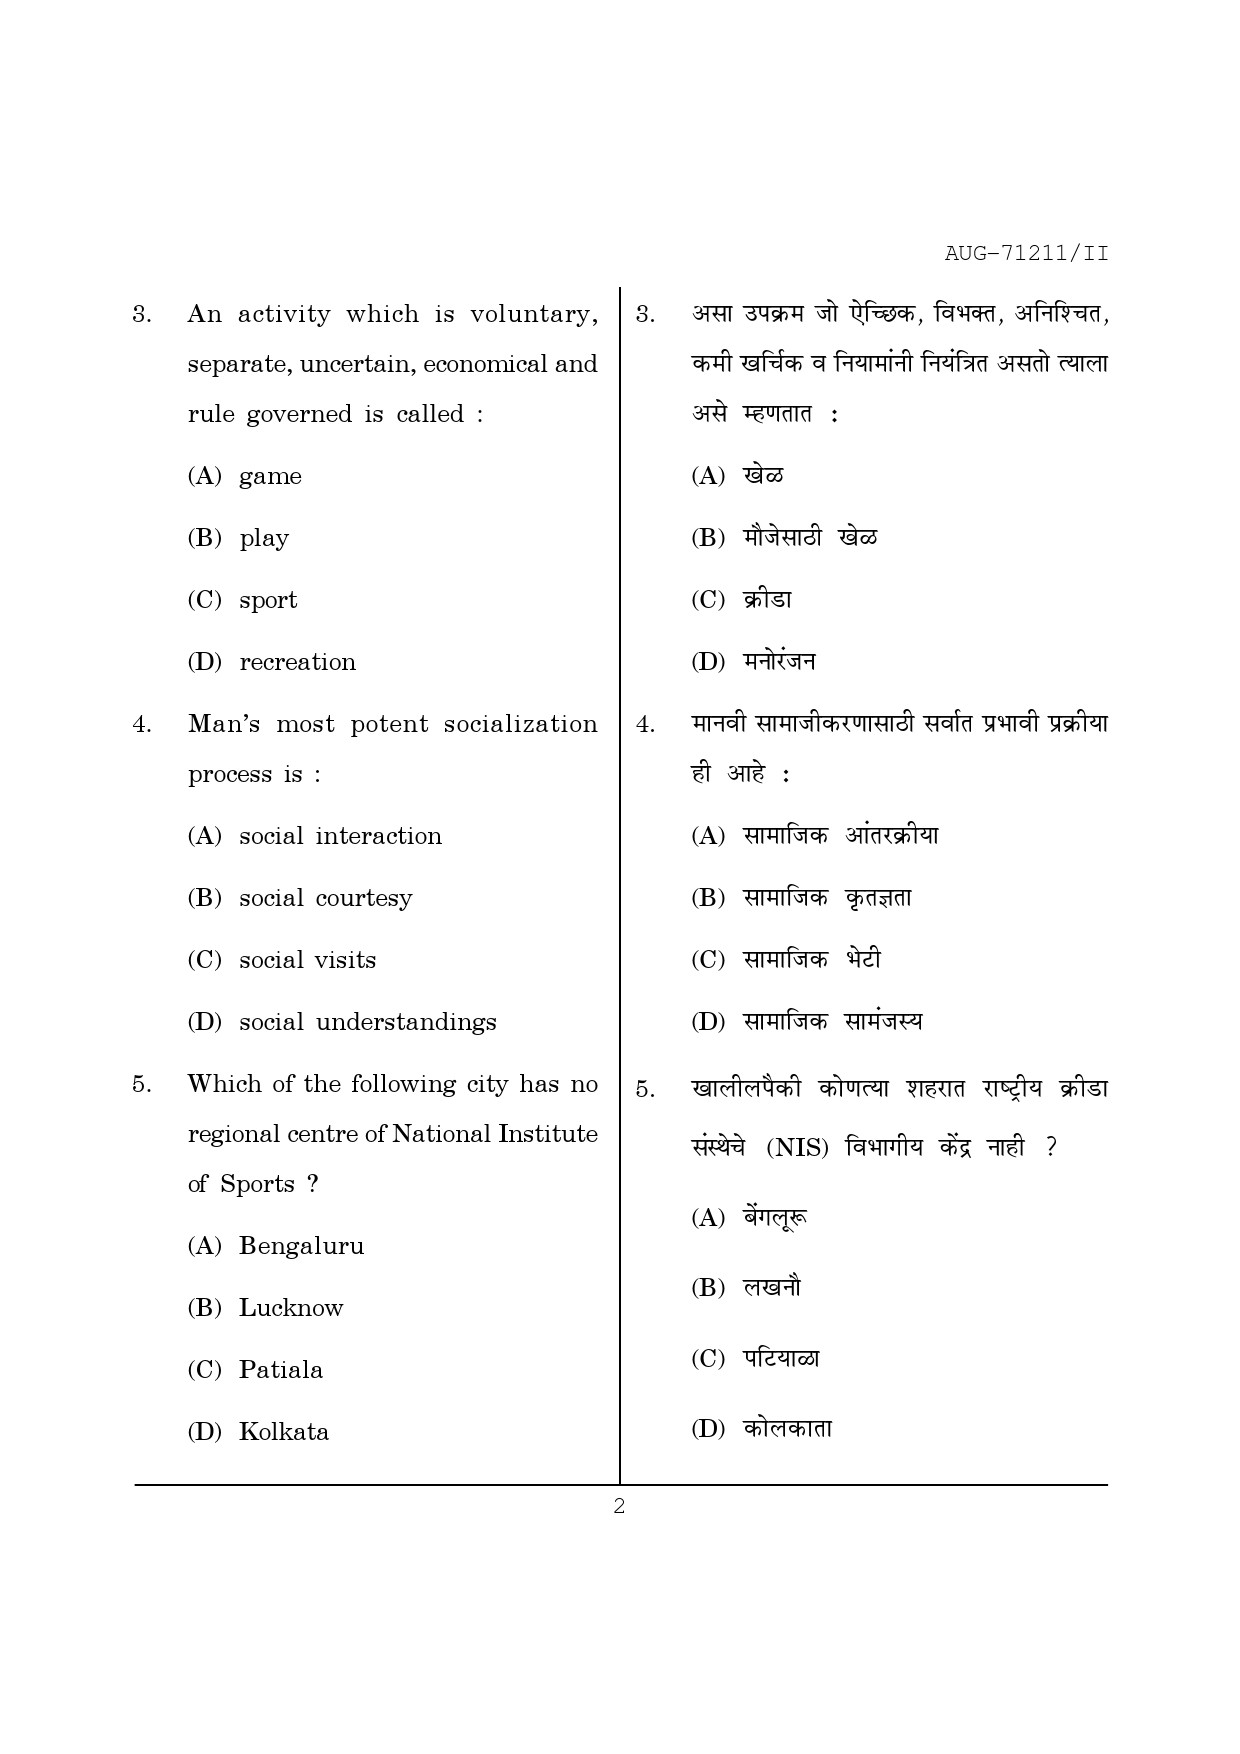 Maharashtra SET Physical Education Question Paper II August 2011 2